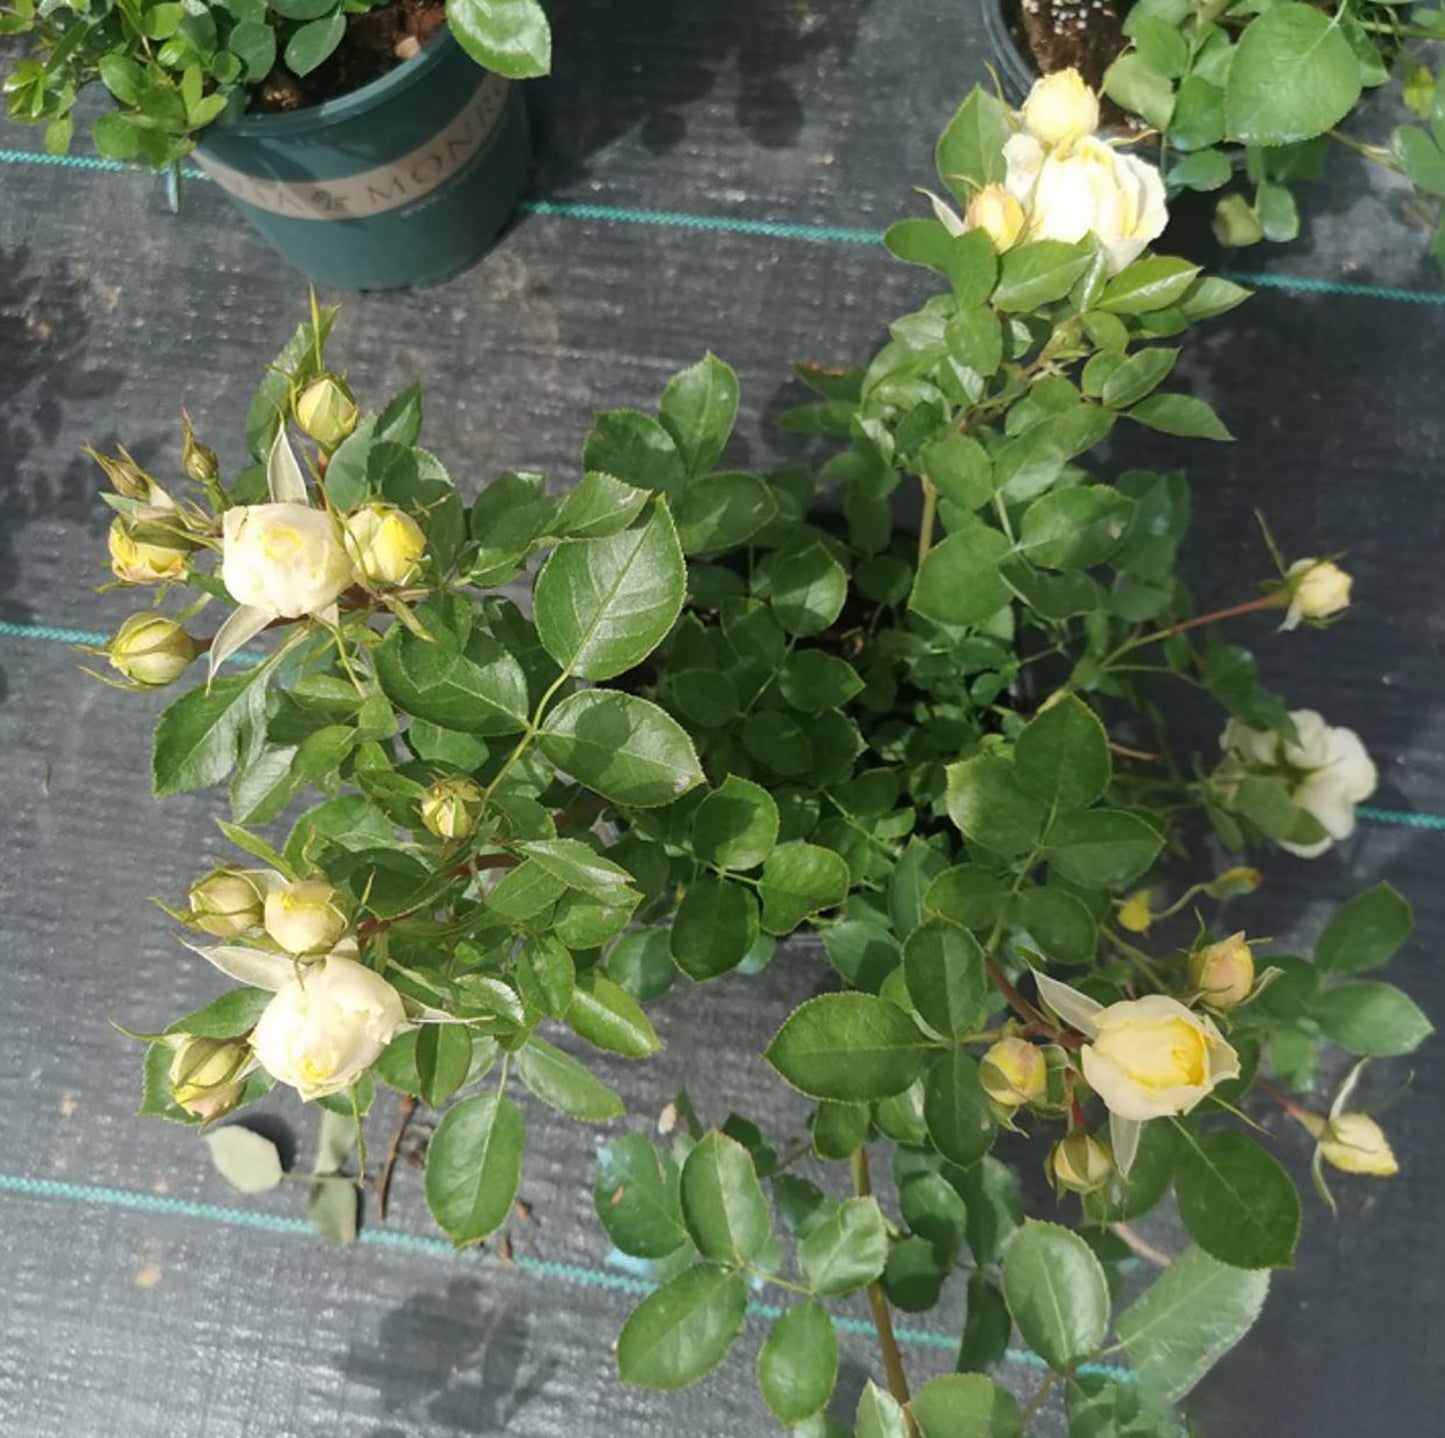 Canary 金丝雀，Floribunda Rose, 2 Years Old 1 Gal,  Non-Grafted/Own Root.